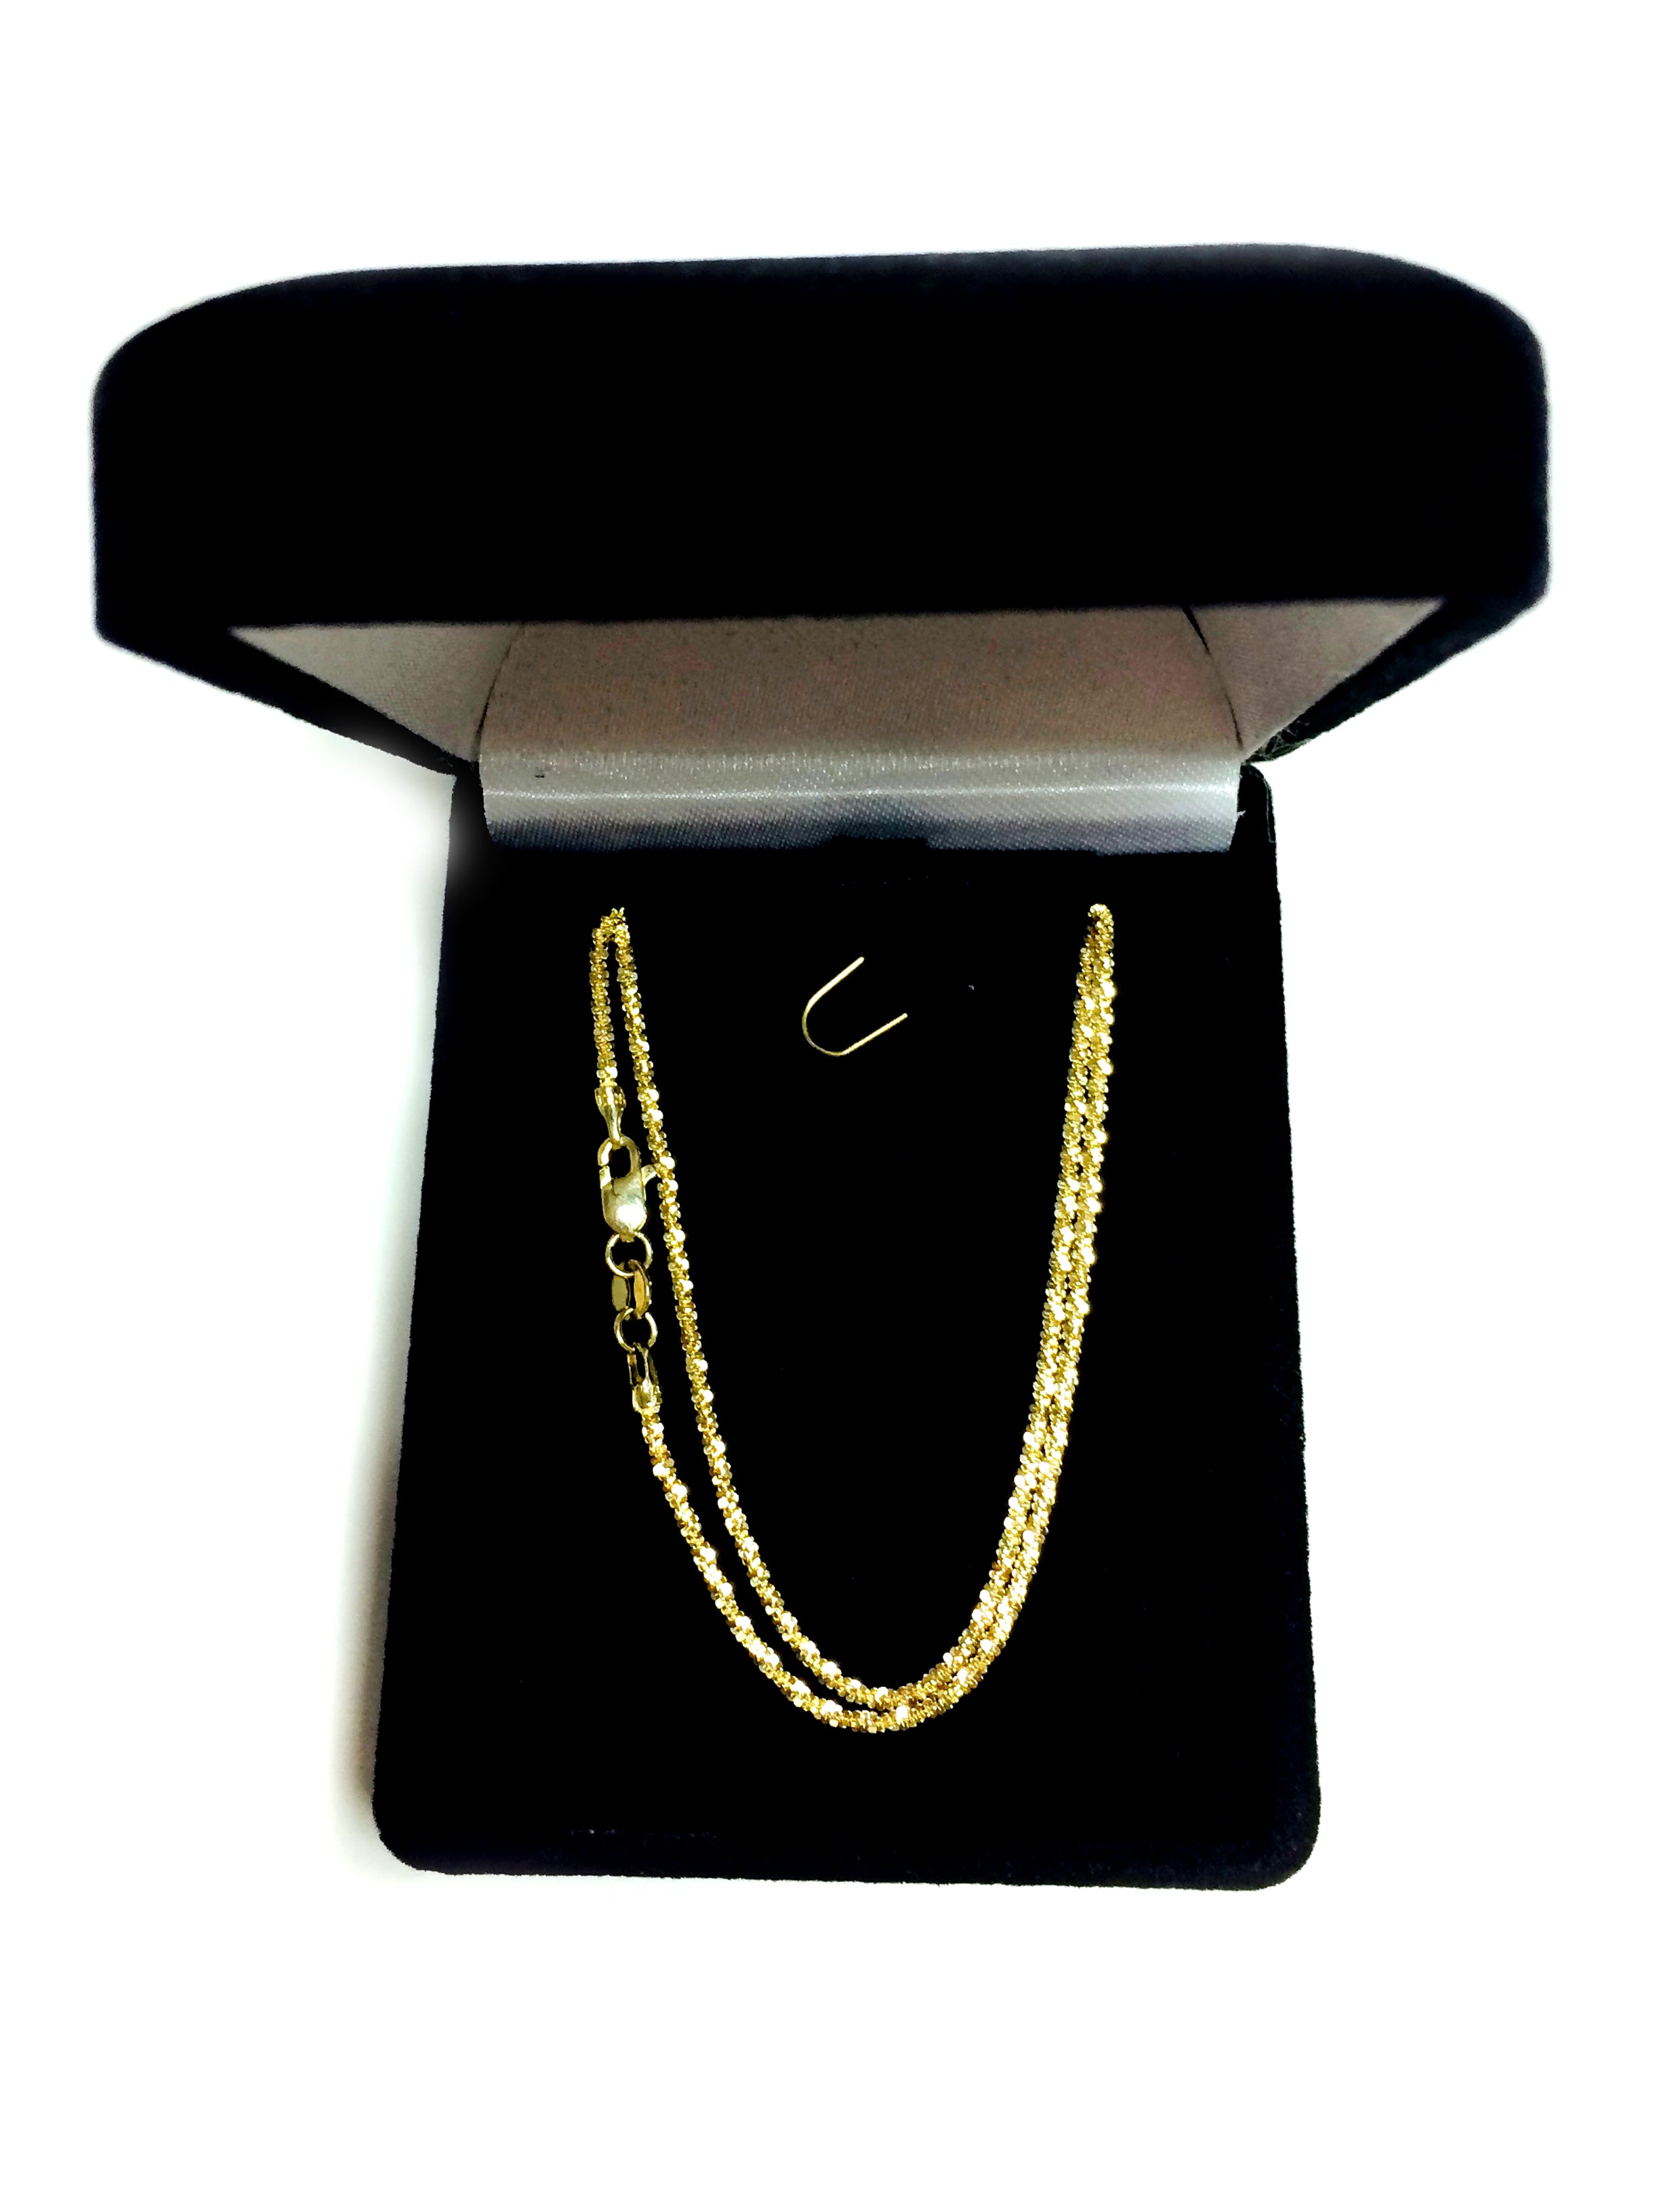 14k Yellow Gold Sparkle Chain Necklace, 1.5mm